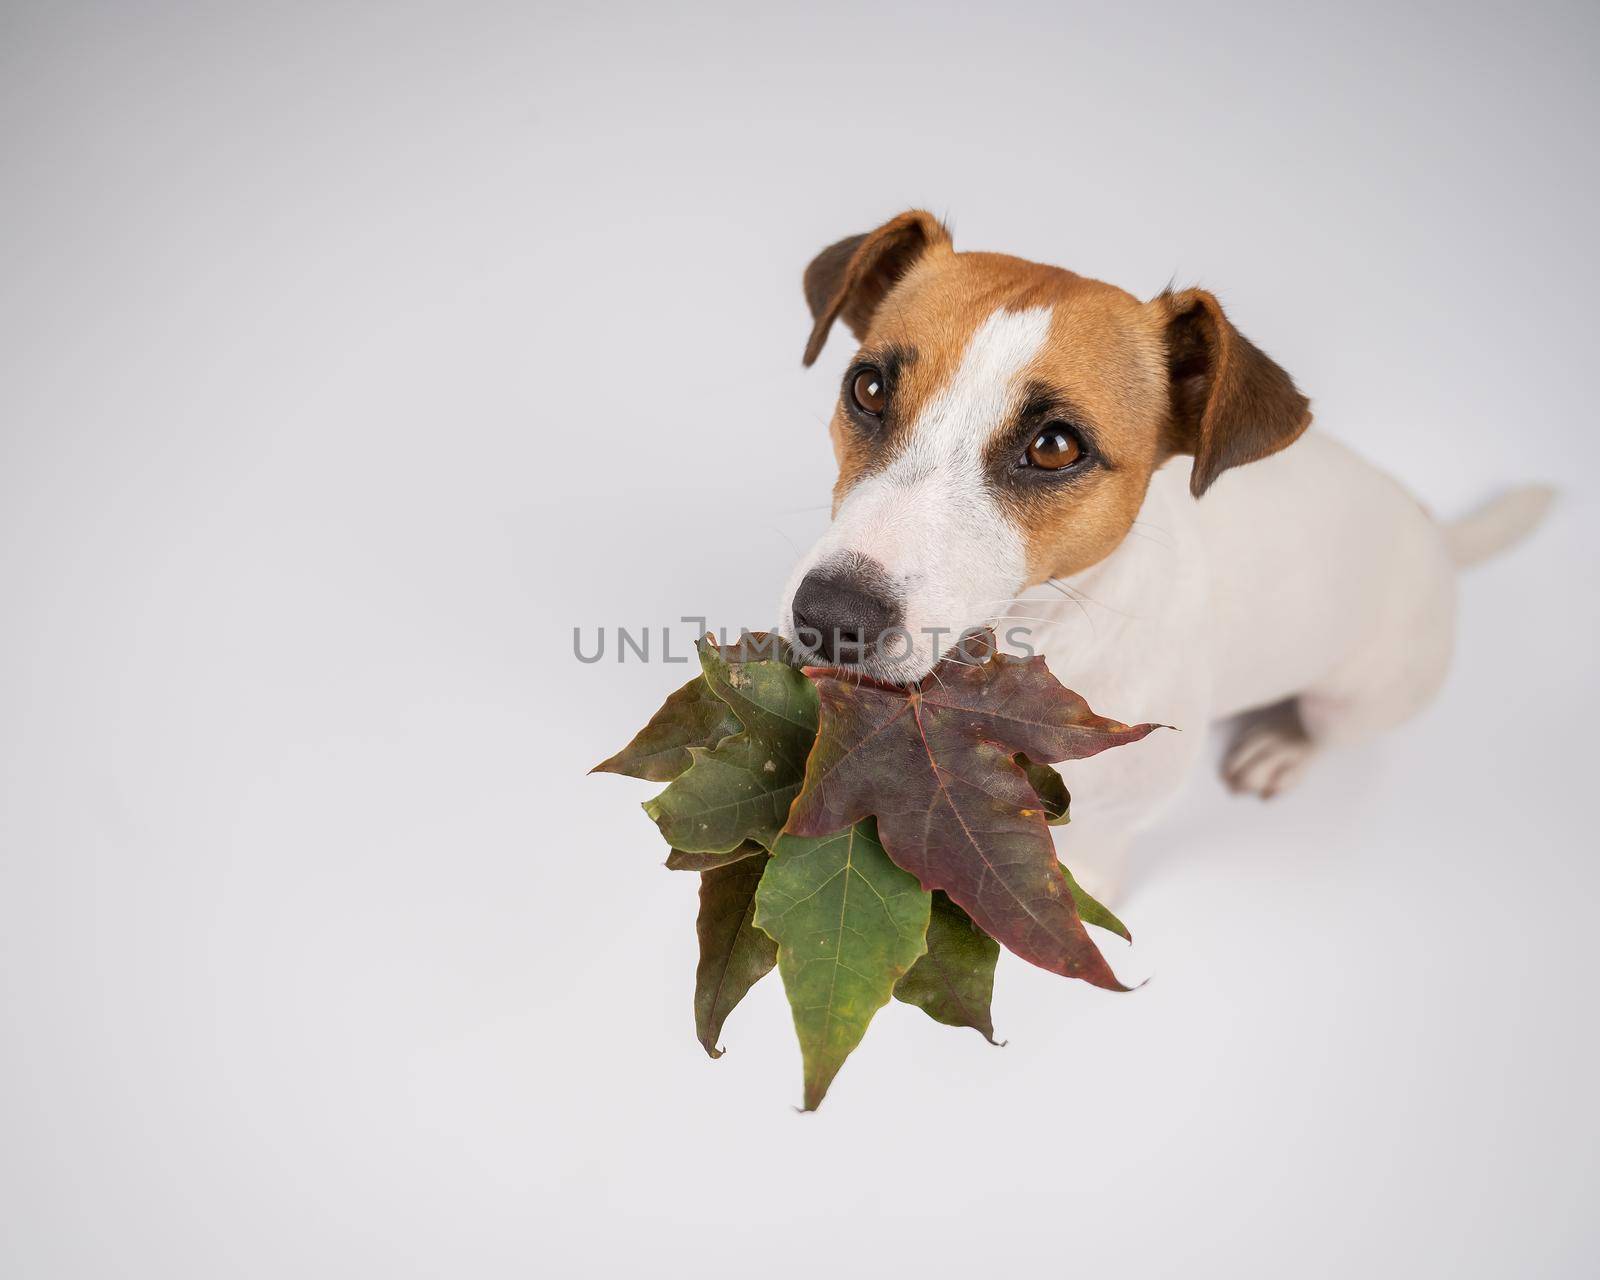 Jack russell terrier dog holding fallen maple leaves on a white background in the studio. by mrwed54